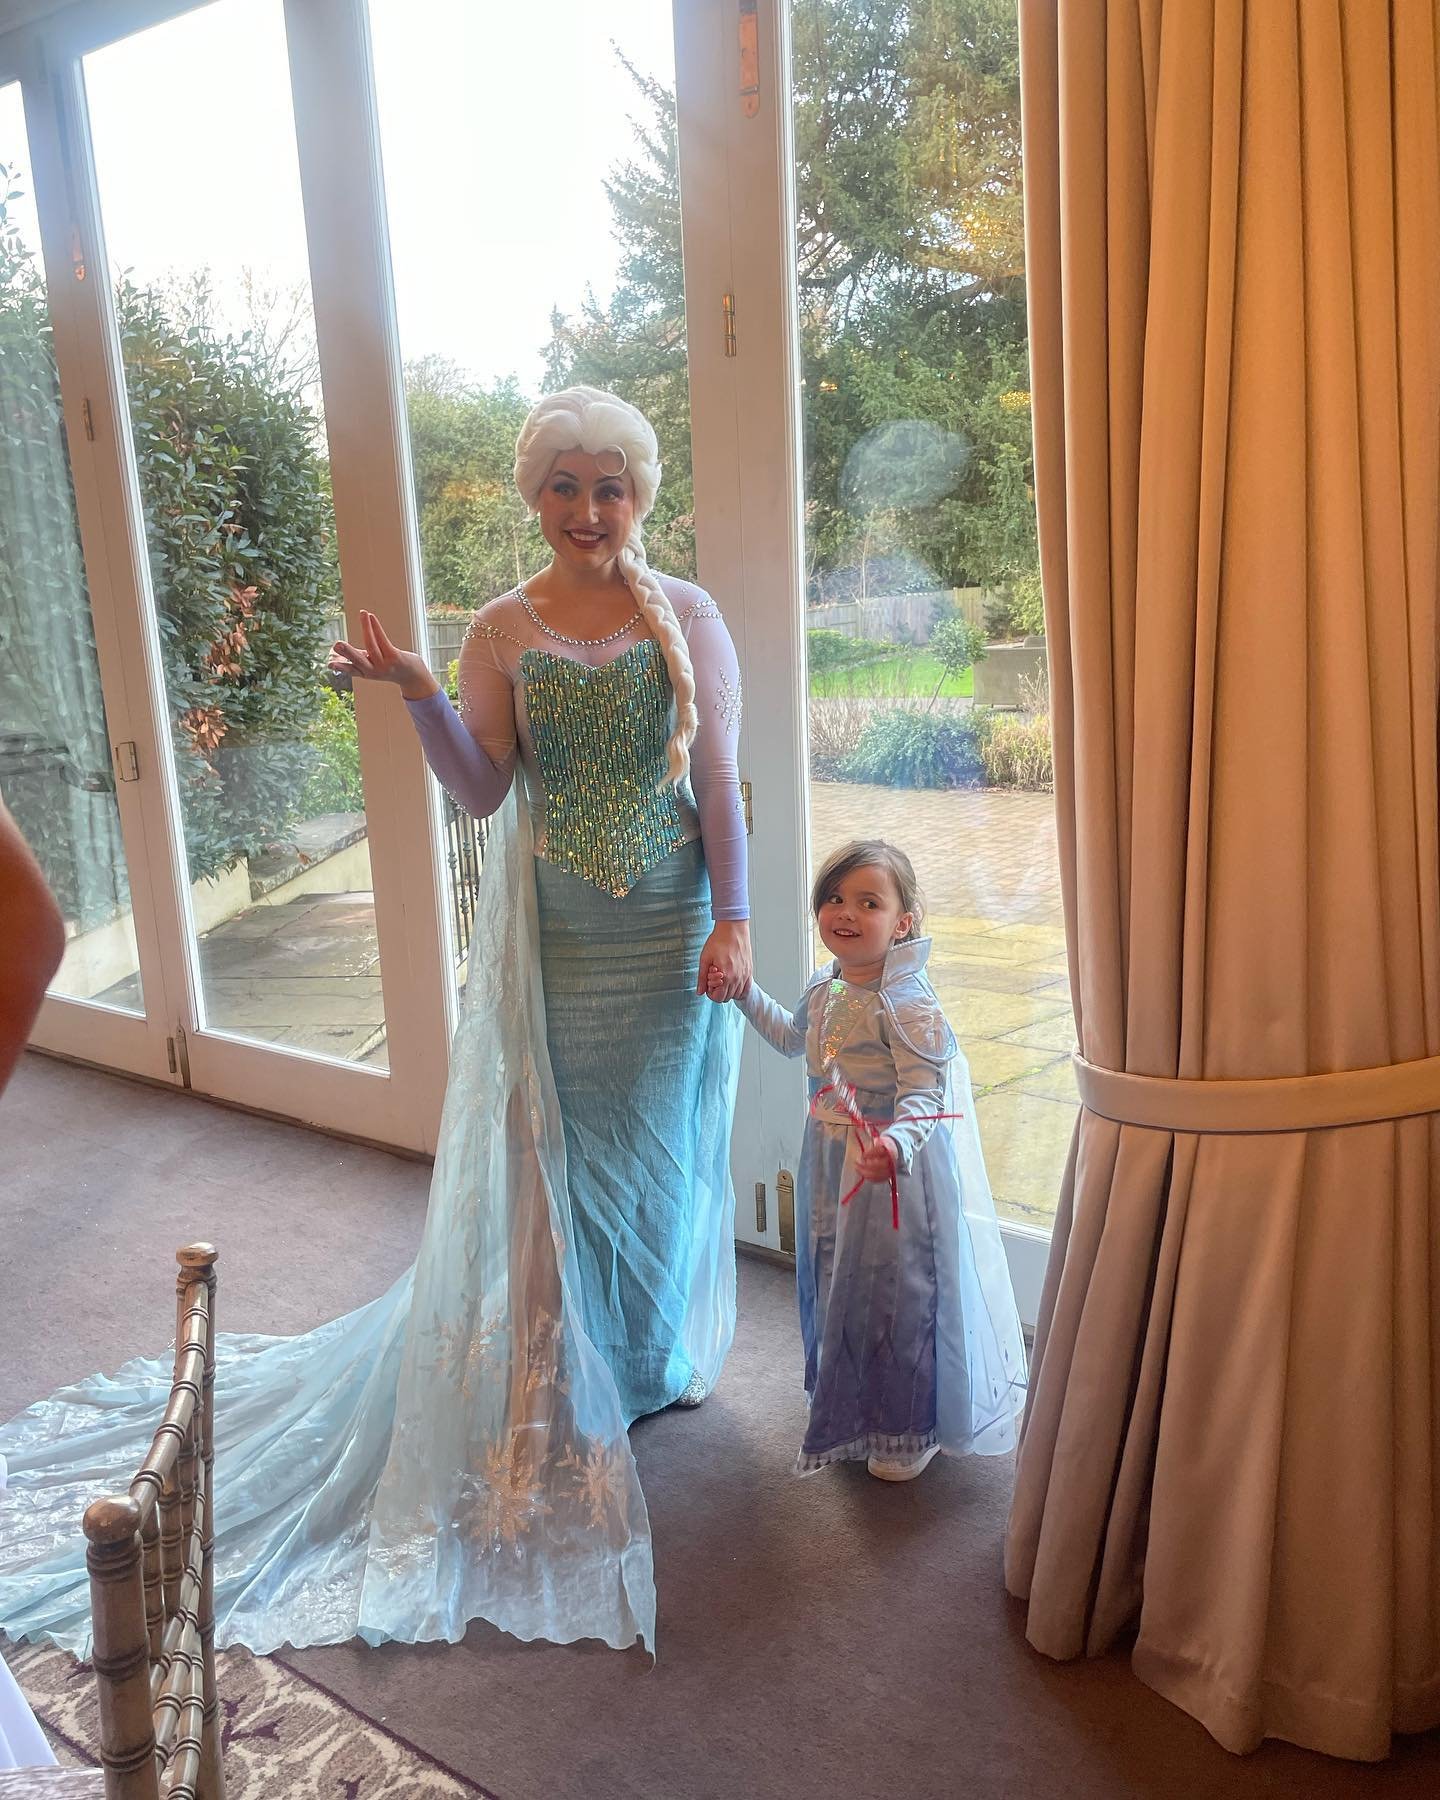 We love appearing at Down Hall! Throwback to when our Rose Princess, Ice Queen &amp; Fairest Princess graced the halls. We&rsquo;ll be back here May 31st (now sold out) and August 11th!

#WhereTheMagicBegins
💻www.magicalprincesspartiesessex.com
📲 0